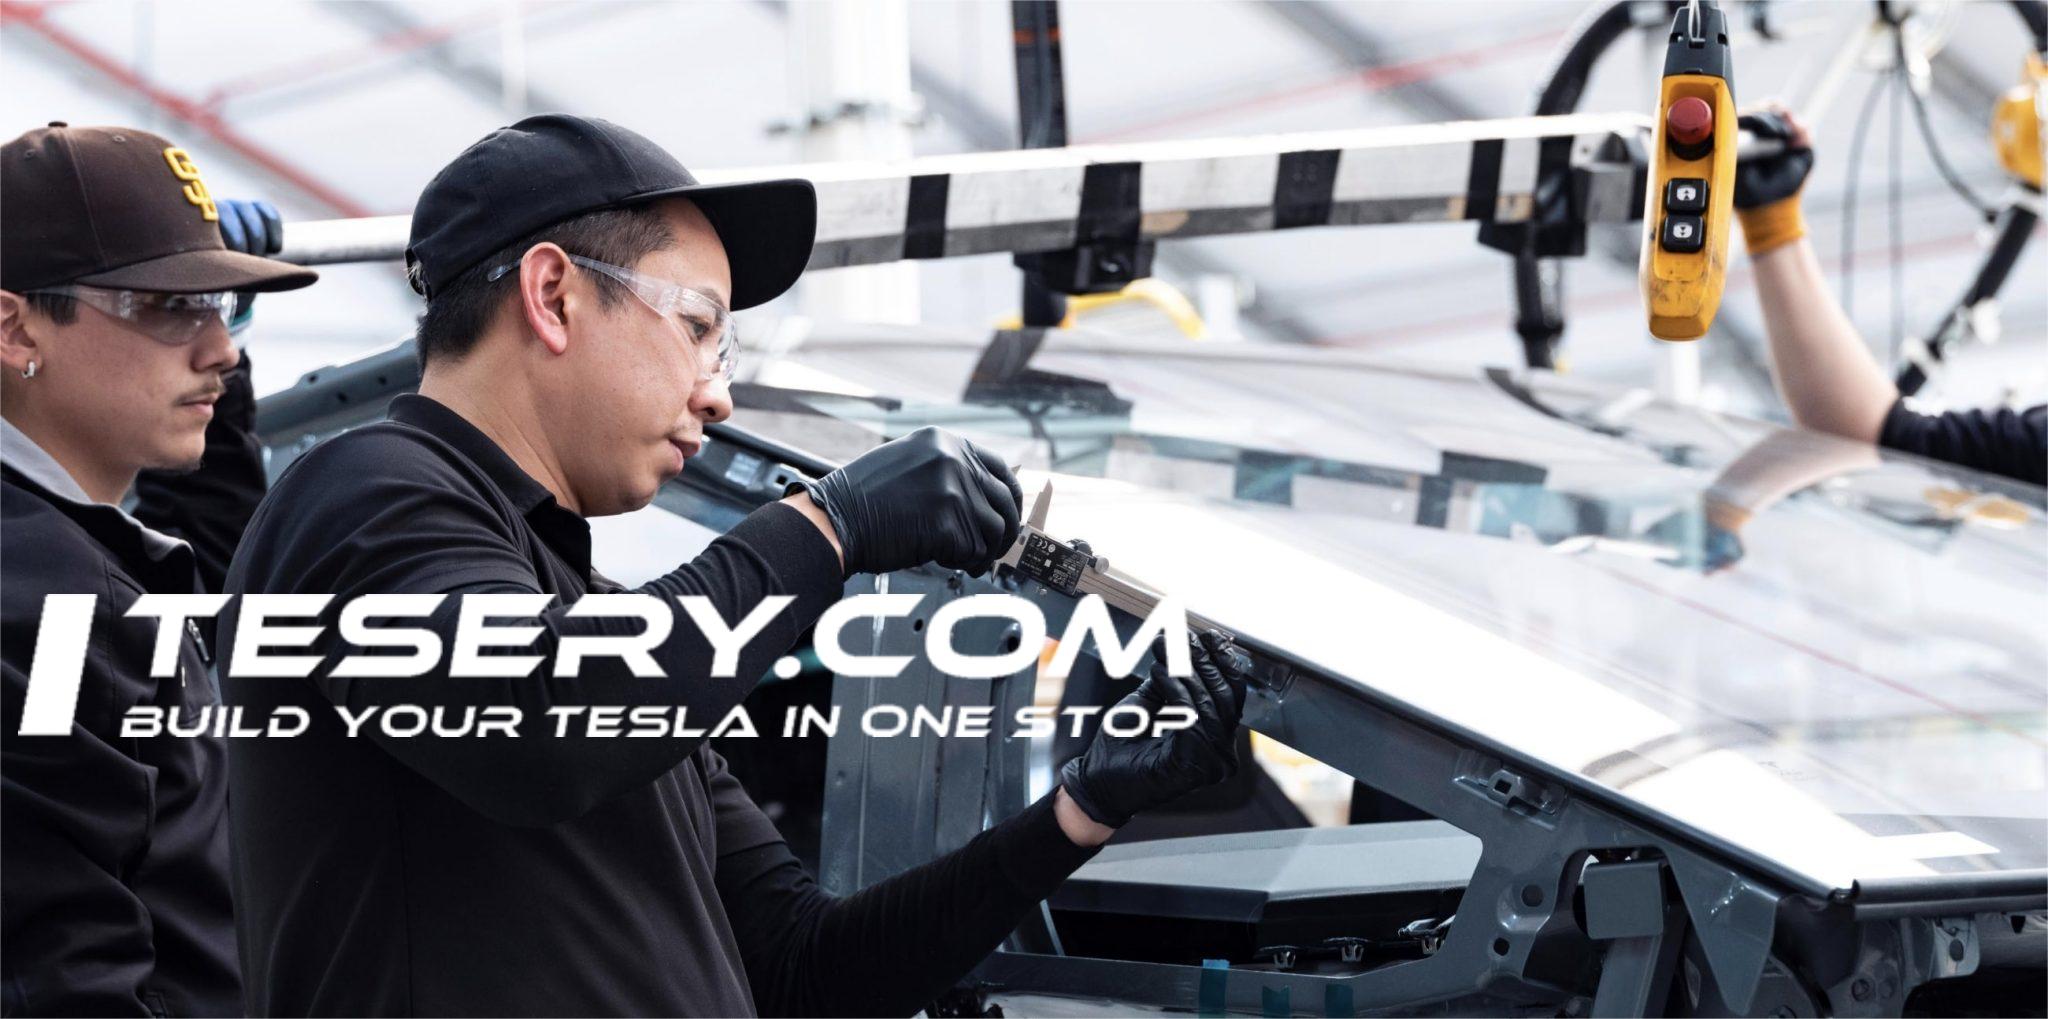 Tesla's Cybertrucks Gaining Momentum in Giga Texas Production Lines - Tesery Official Store